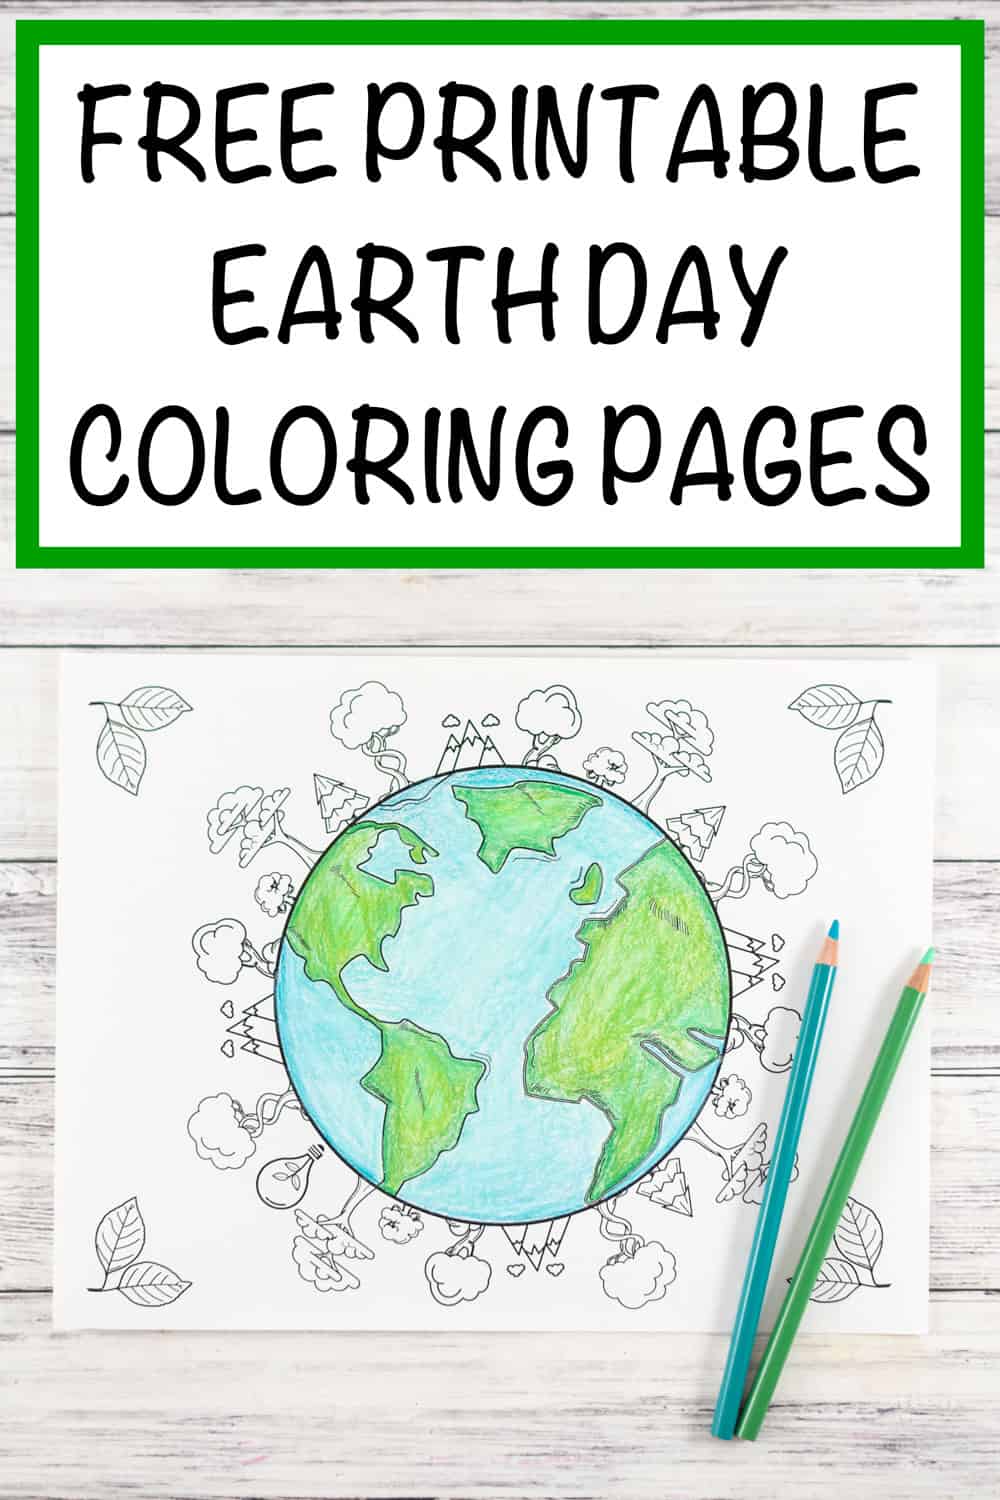 Earth day and environmental coloring pages